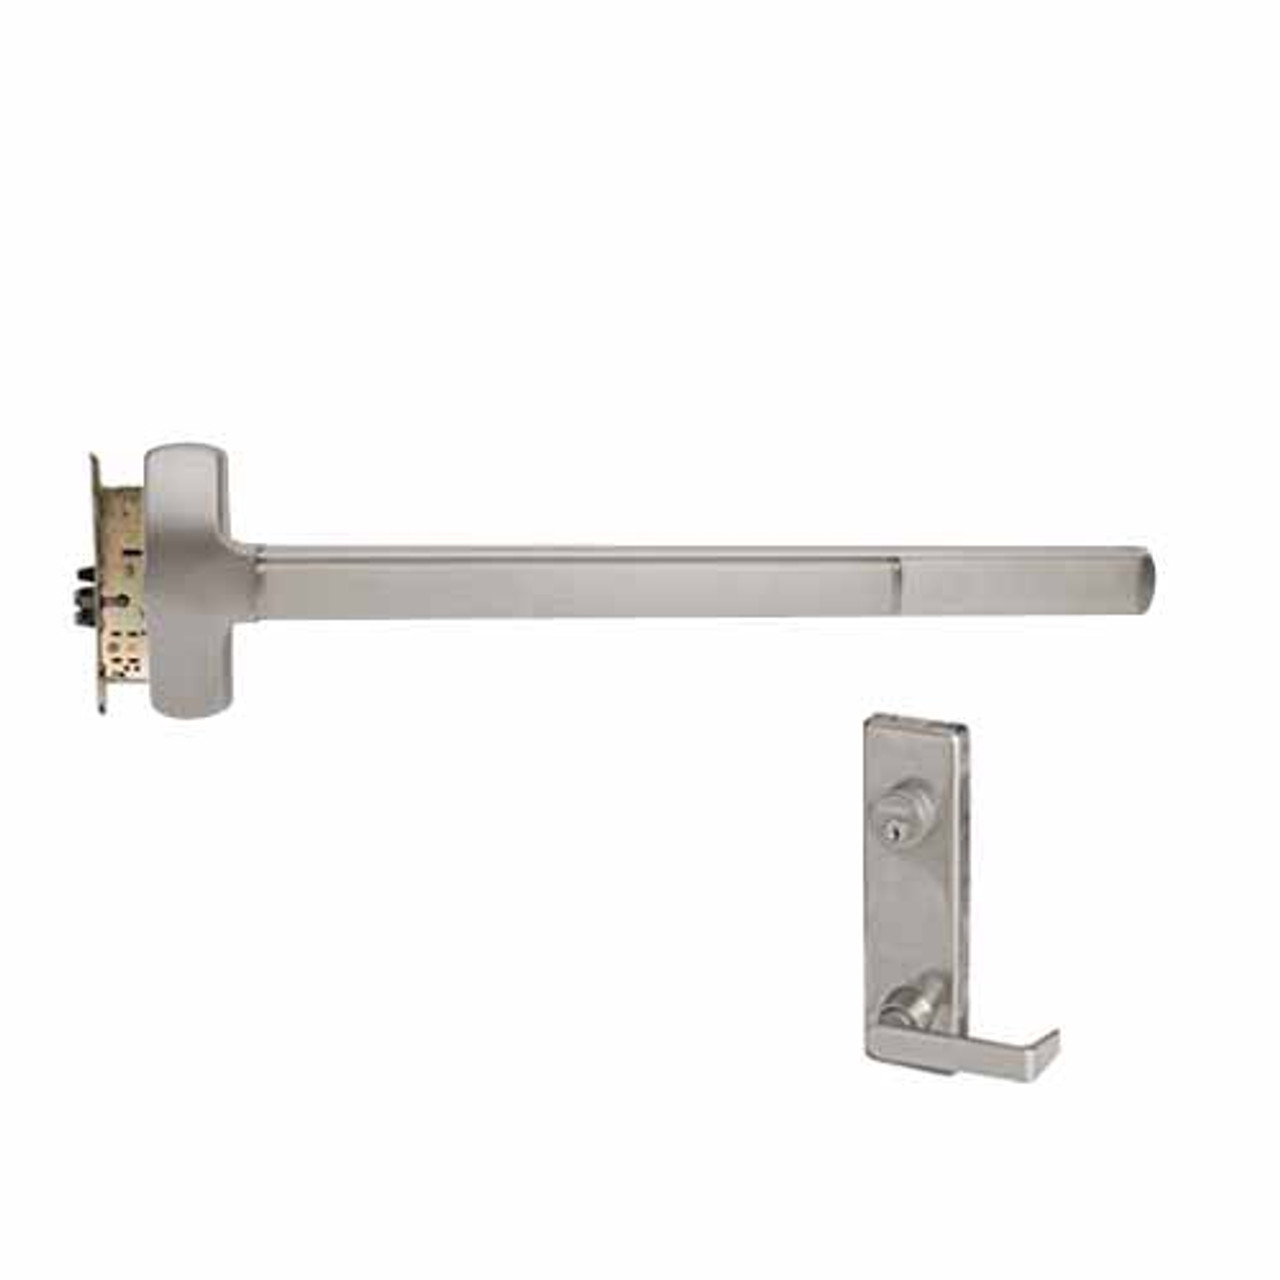 F-25-M-L-Dane-US32D-3-RHR Falcon Exit Device in Satin Stainless Steel